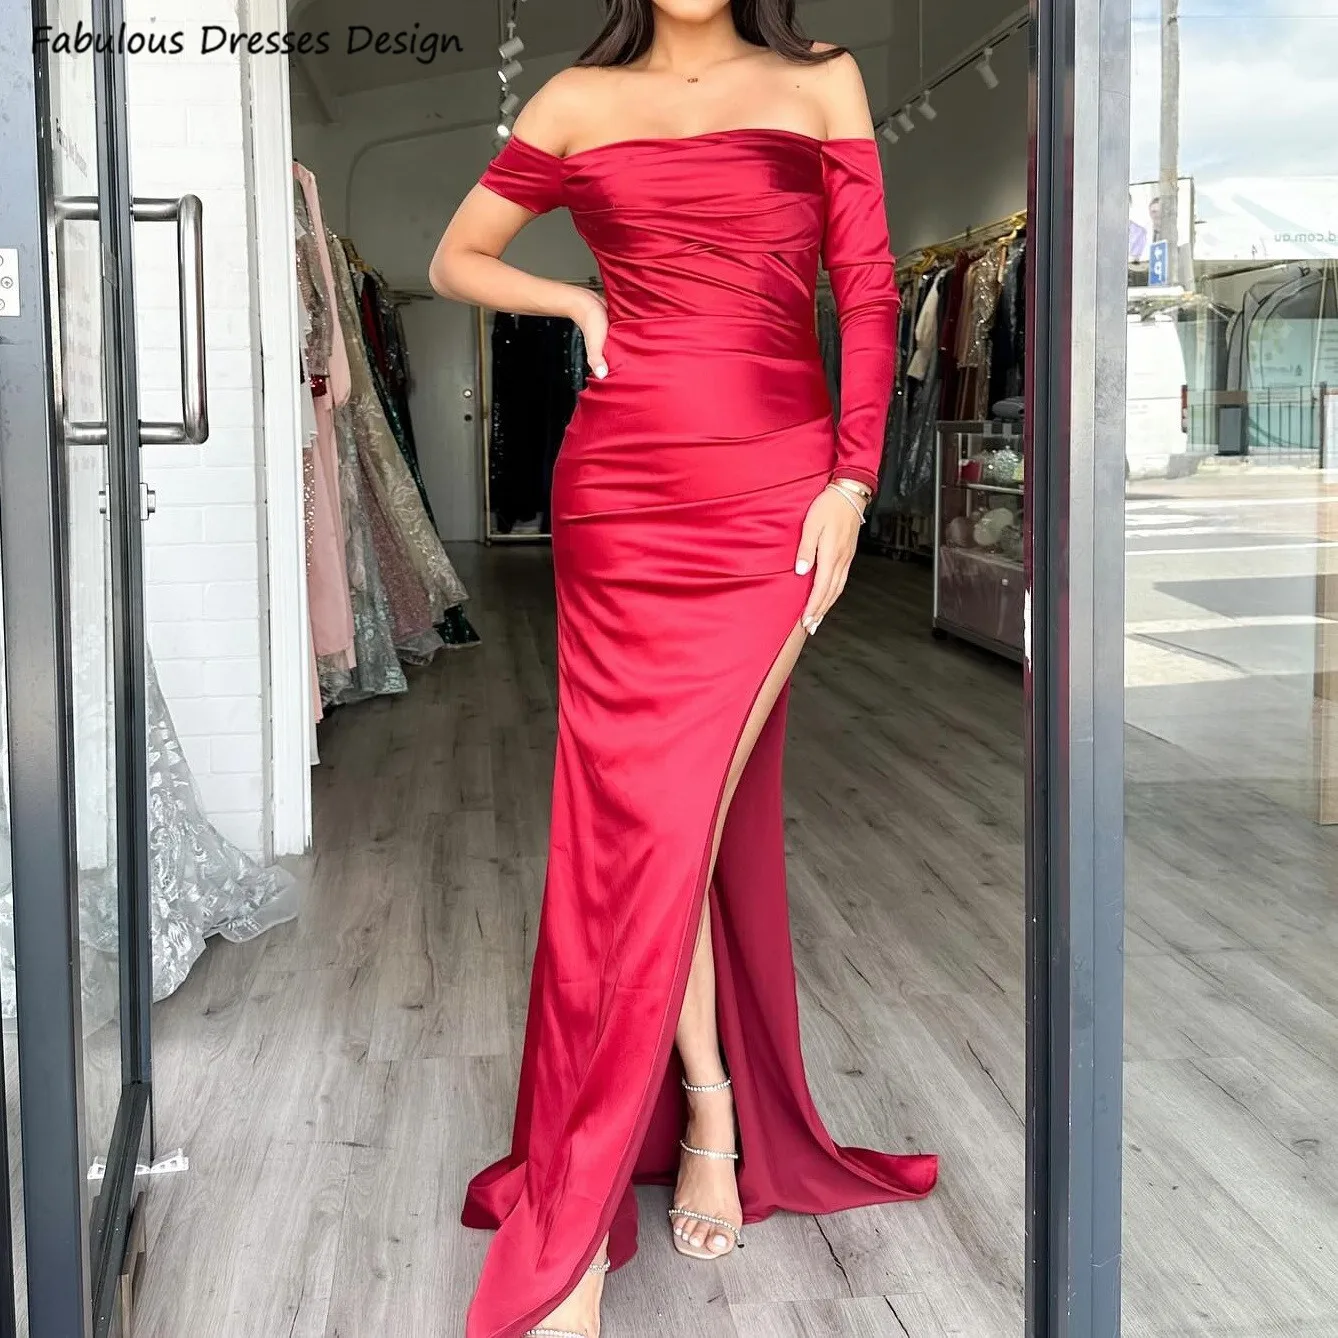 

Off Shoulder One Sleeve Bridesmaid Dresses Red Long Mermaid Boat Neck Slit Backless Wedding Guest Dress Women Prom Party Gown